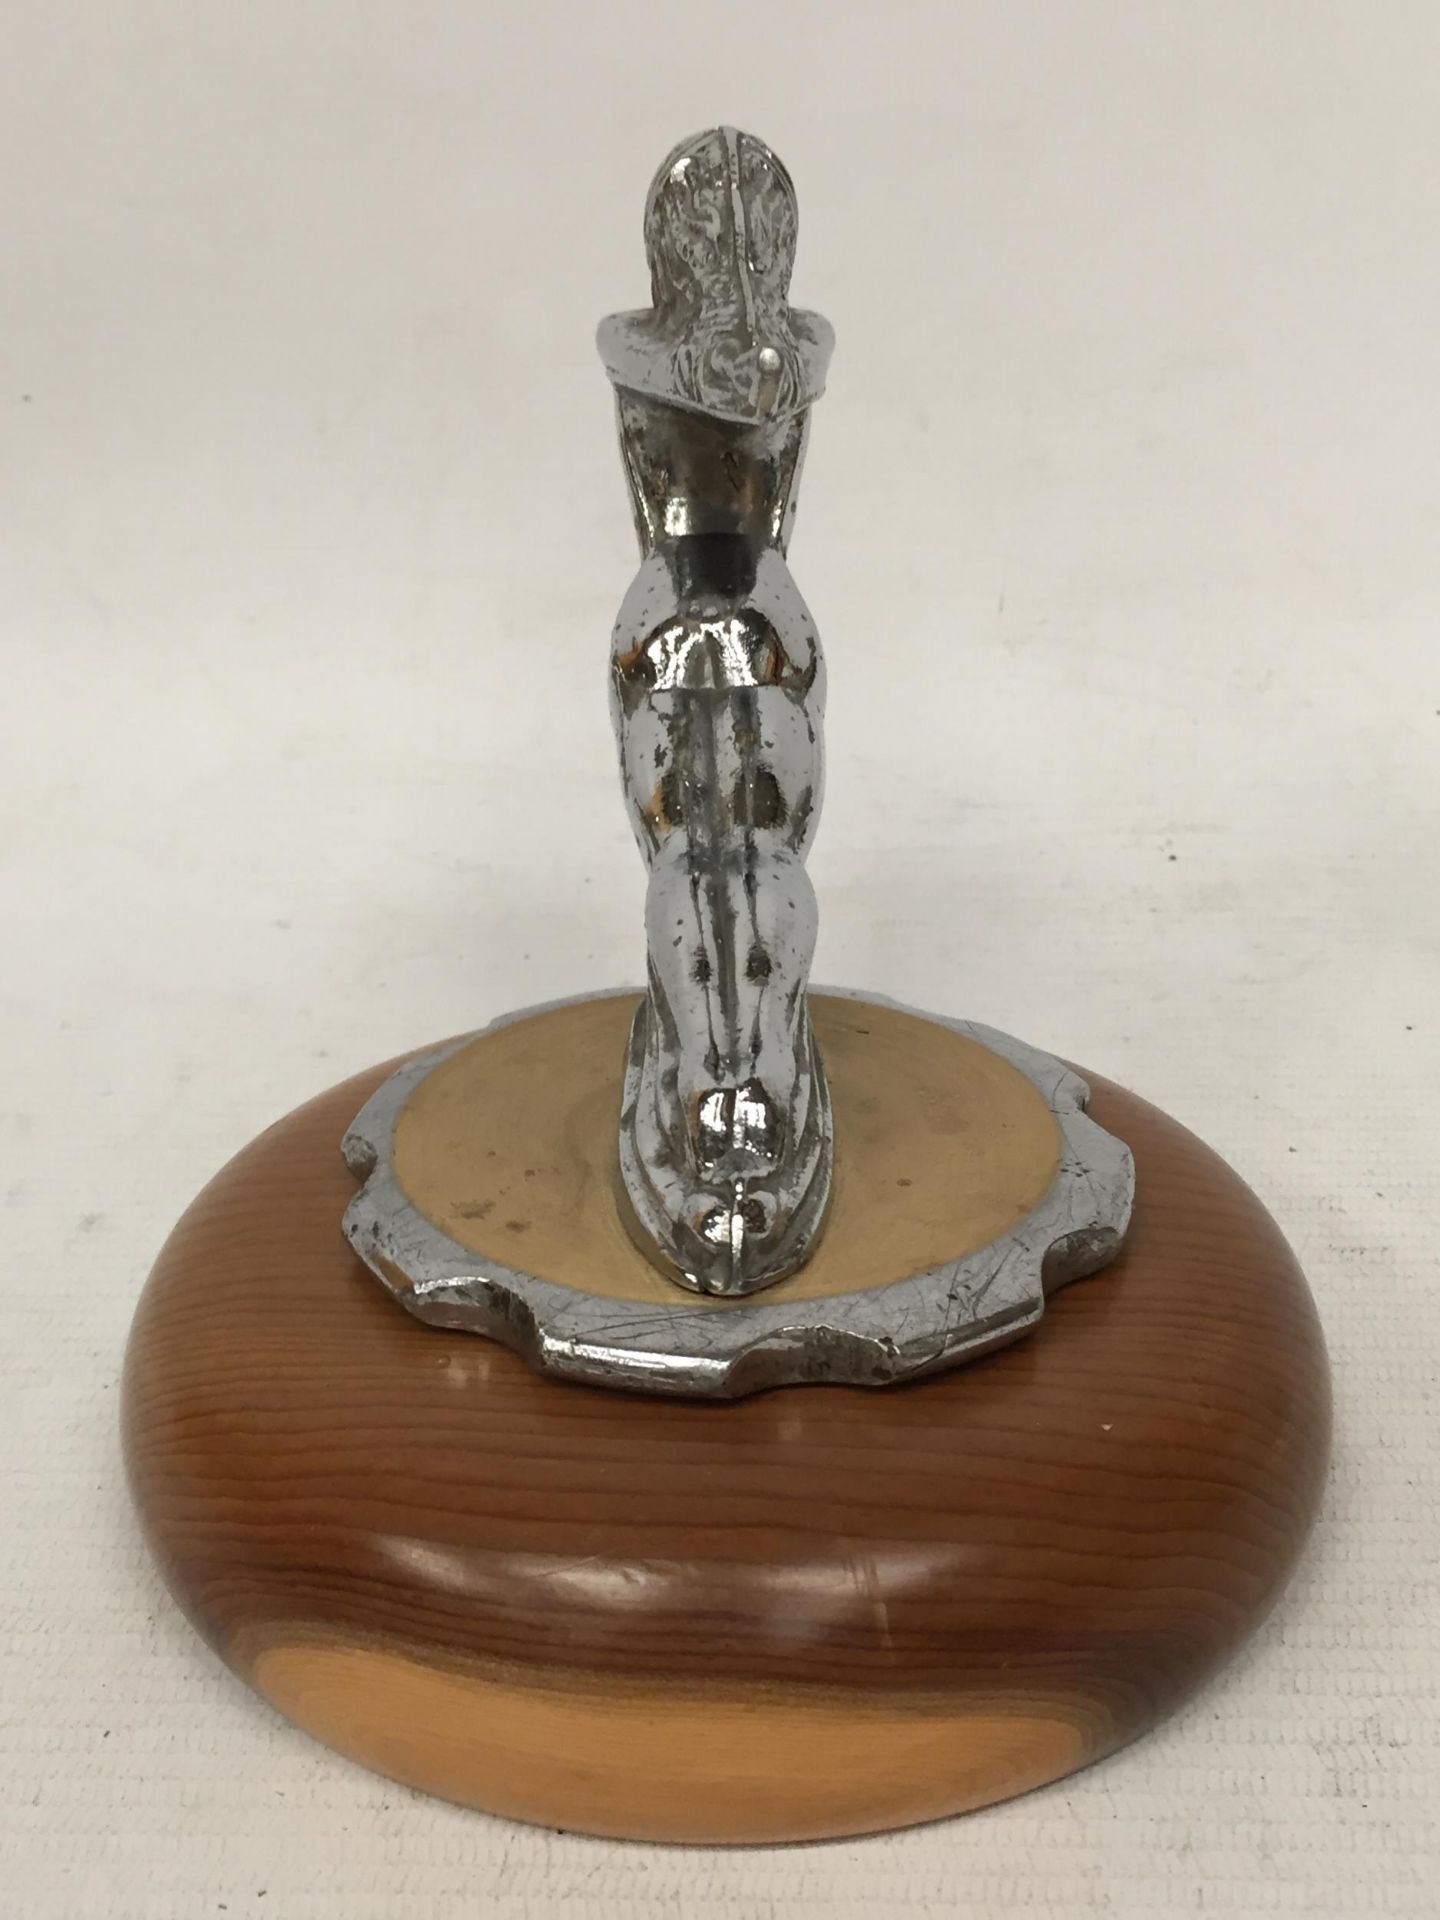 A NUDE LADY CHROME EFFECT CAR MASCOT ON WOODEN BASE - Image 4 of 5